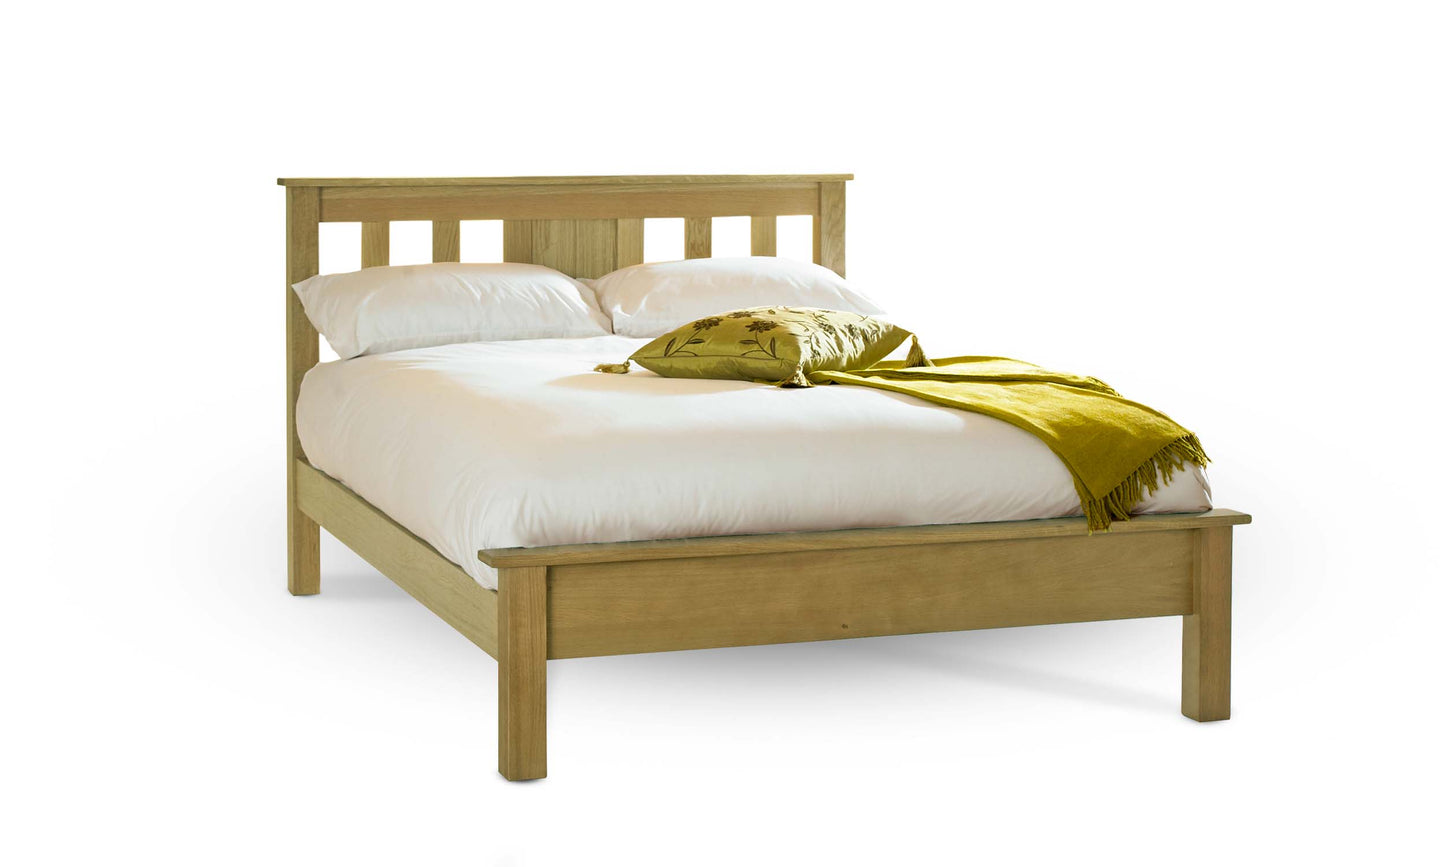 Cavello Bed Frame - 4ft6 Double - Natural Oak